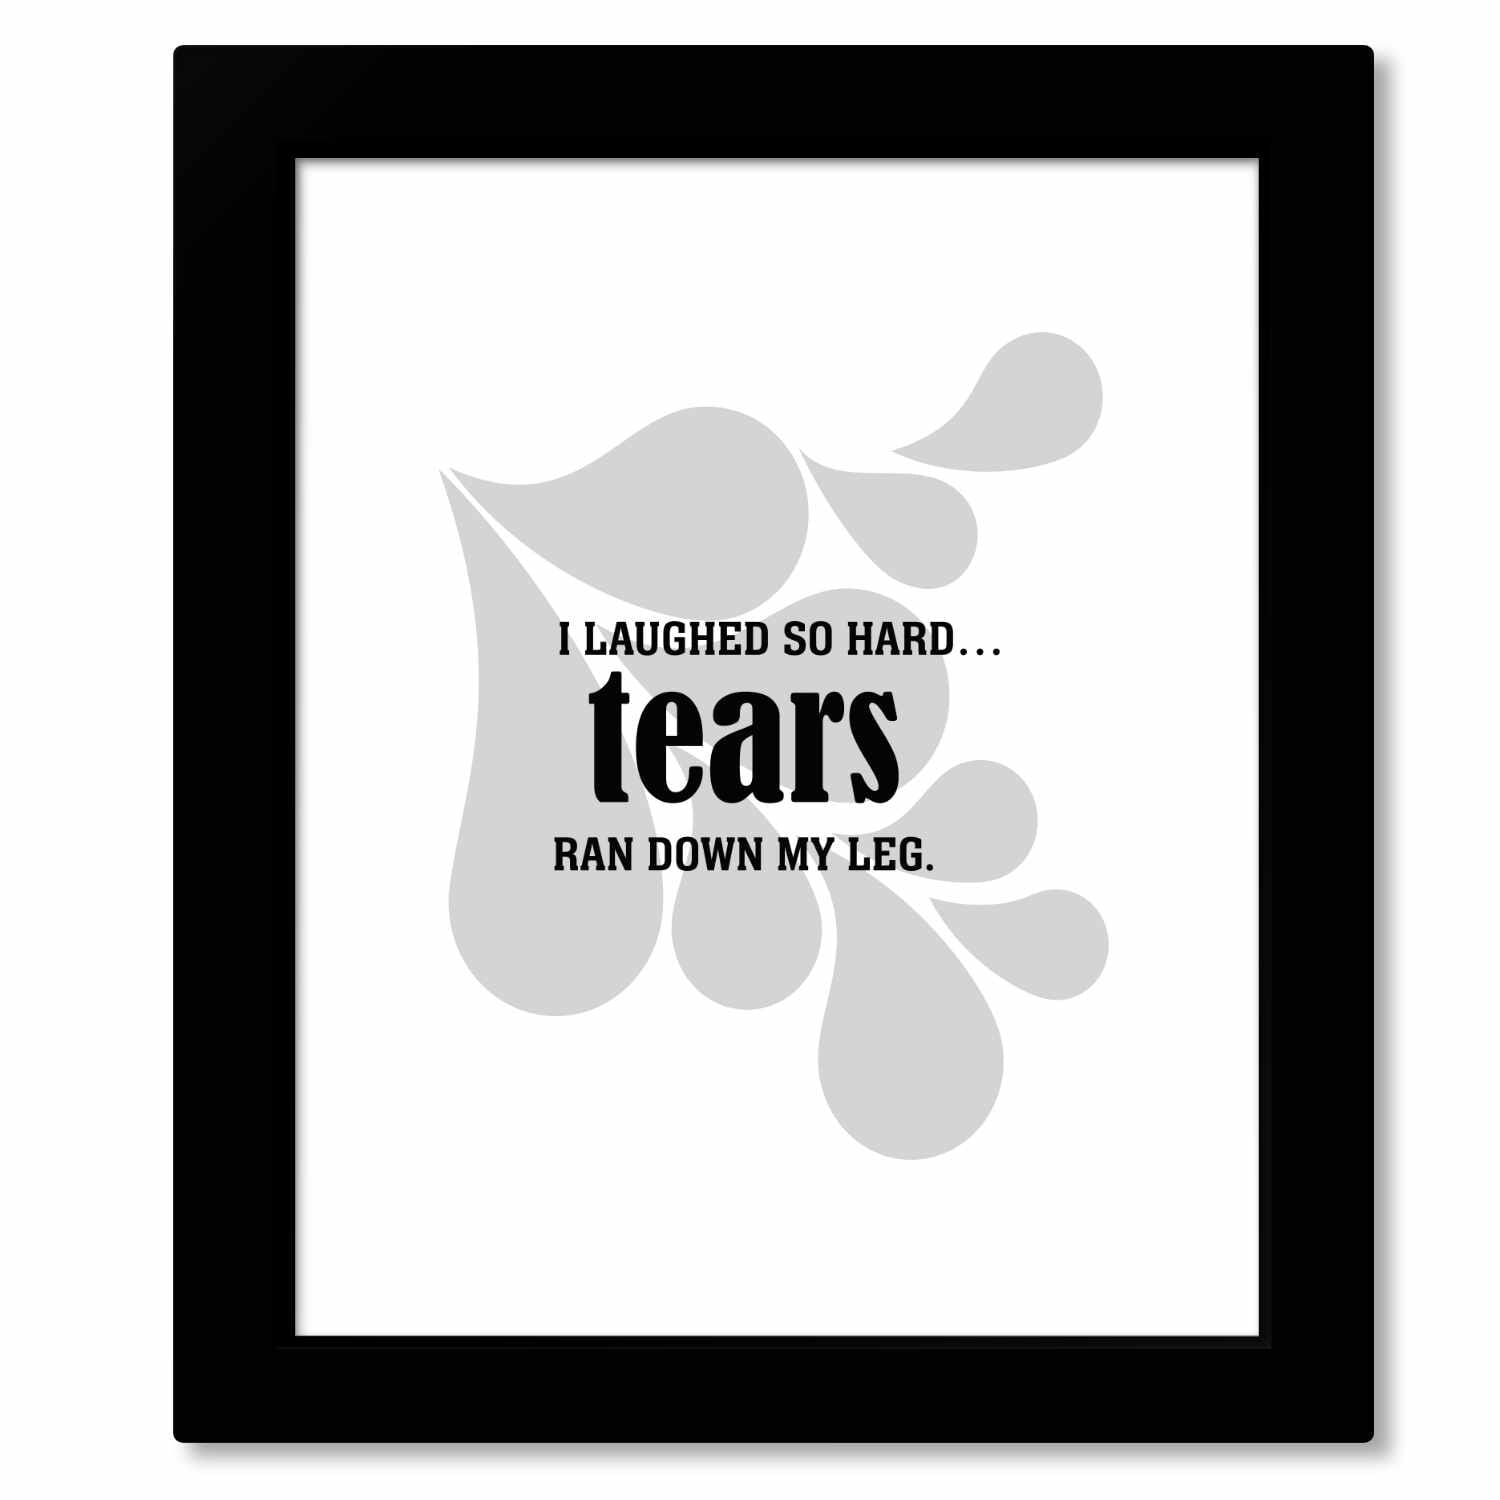 Wise and Witty Art - I Laughed So Hard Tears Ran Down My Leg Wise and Wiseass Quotes Song Lyrics Art 8x10 Framed Print 